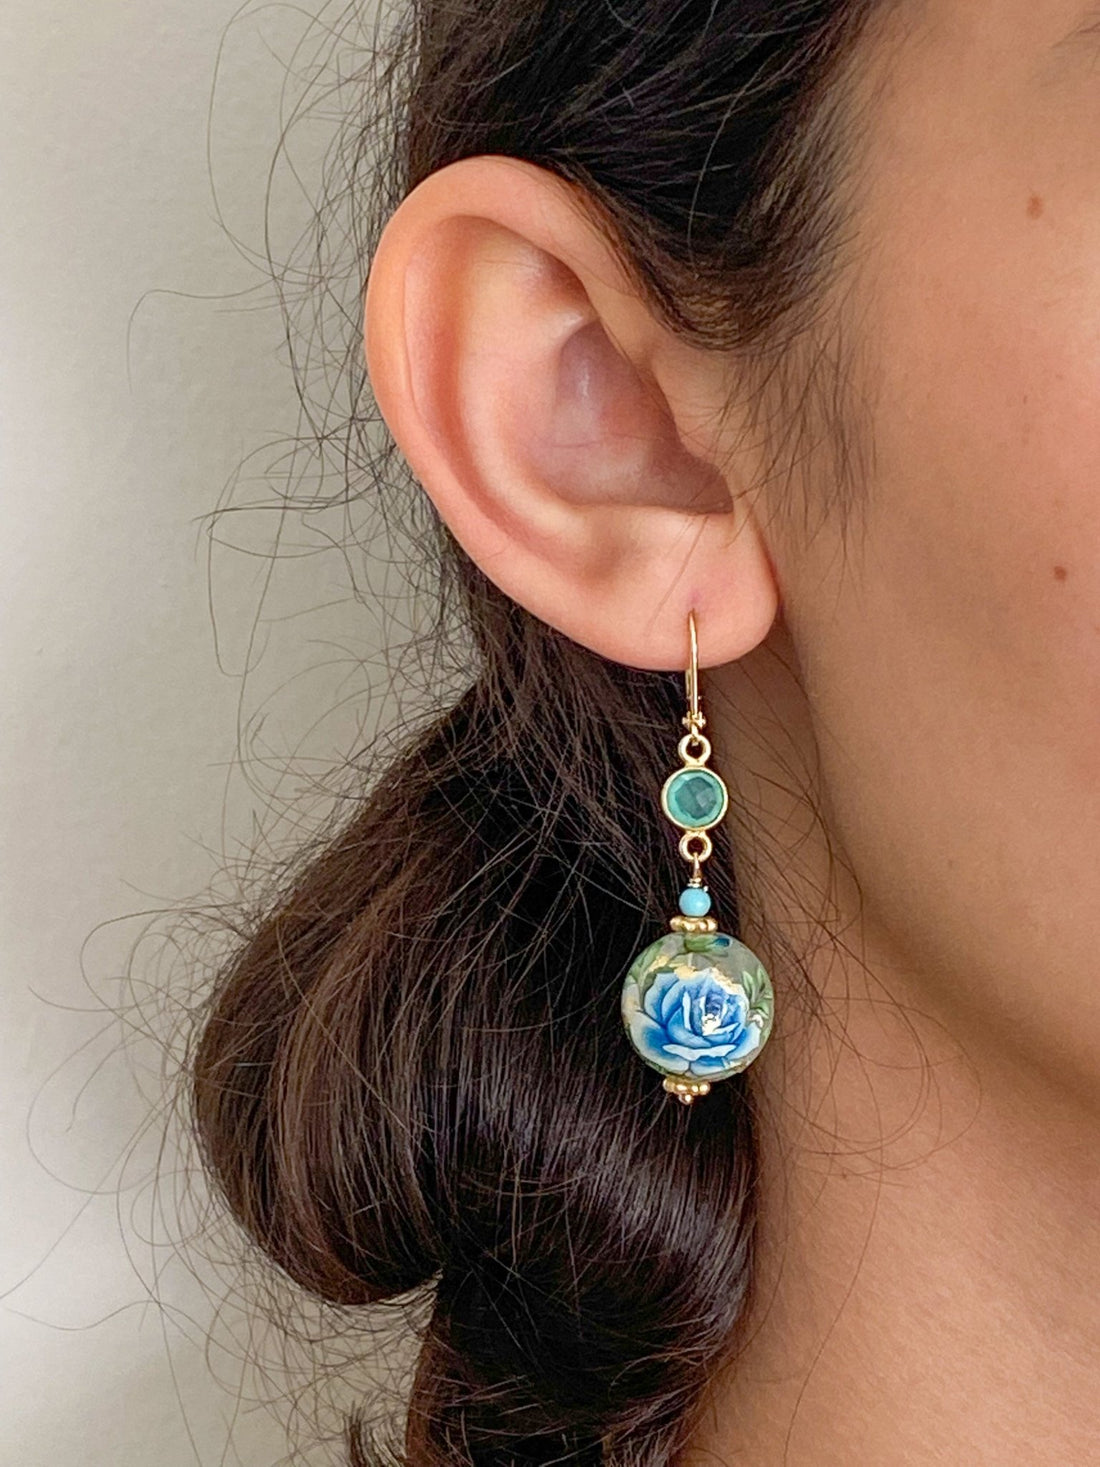 Blue Rose Resin Floral Ball Drop Gold Earrings with Chrysoprase and Turquoise by Sage Machado - The Sage Lifestyle